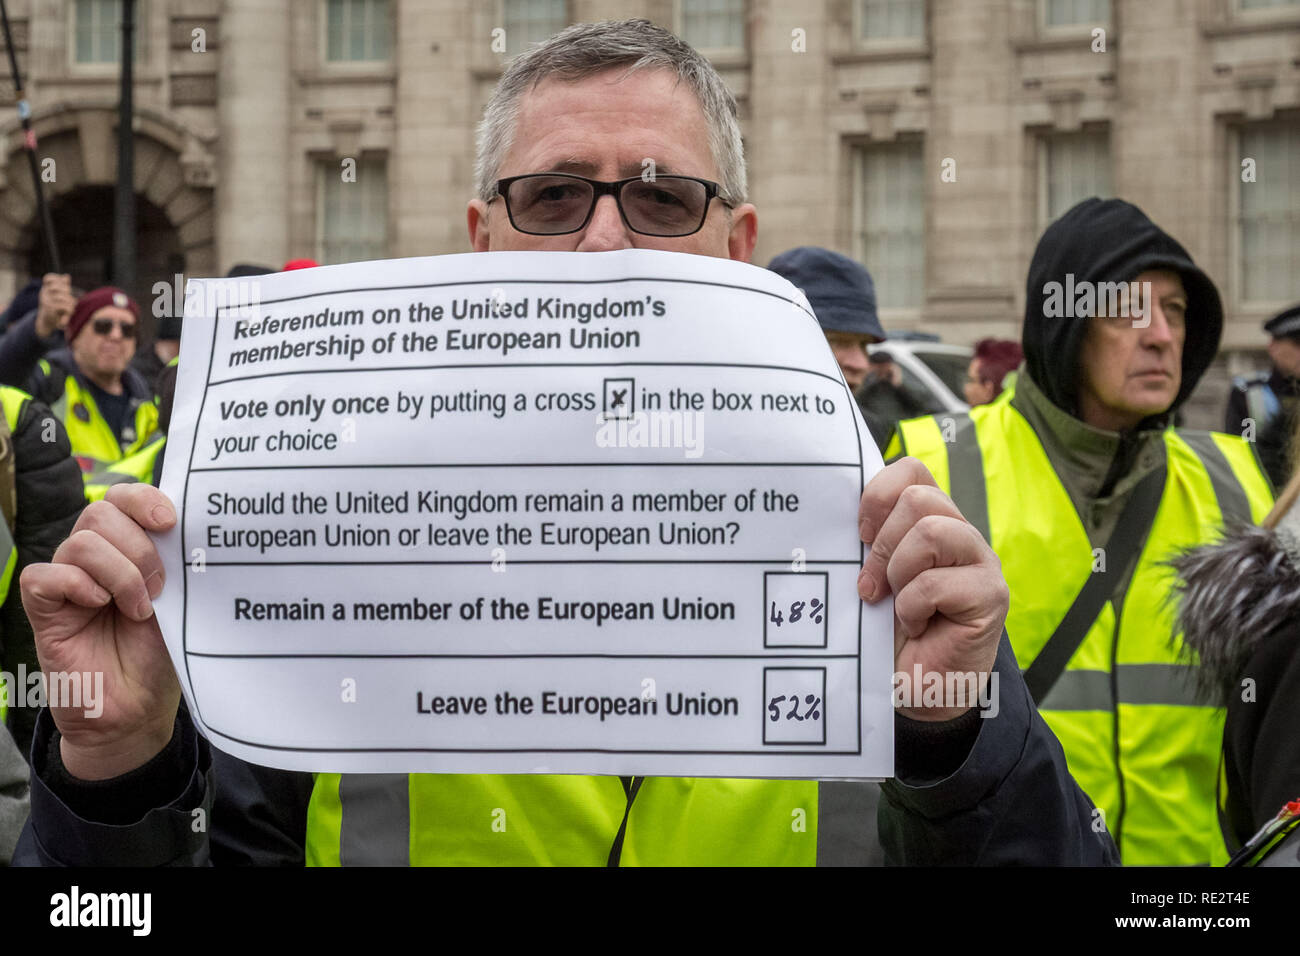 London, UK. 19th January 2019. Pro-Brexit protesters calling themselves the 'Yellow Vests UK' movement block roads and traffic in Westminster. Credit: Guy Corbishley/Alamy Live News Stock Photo